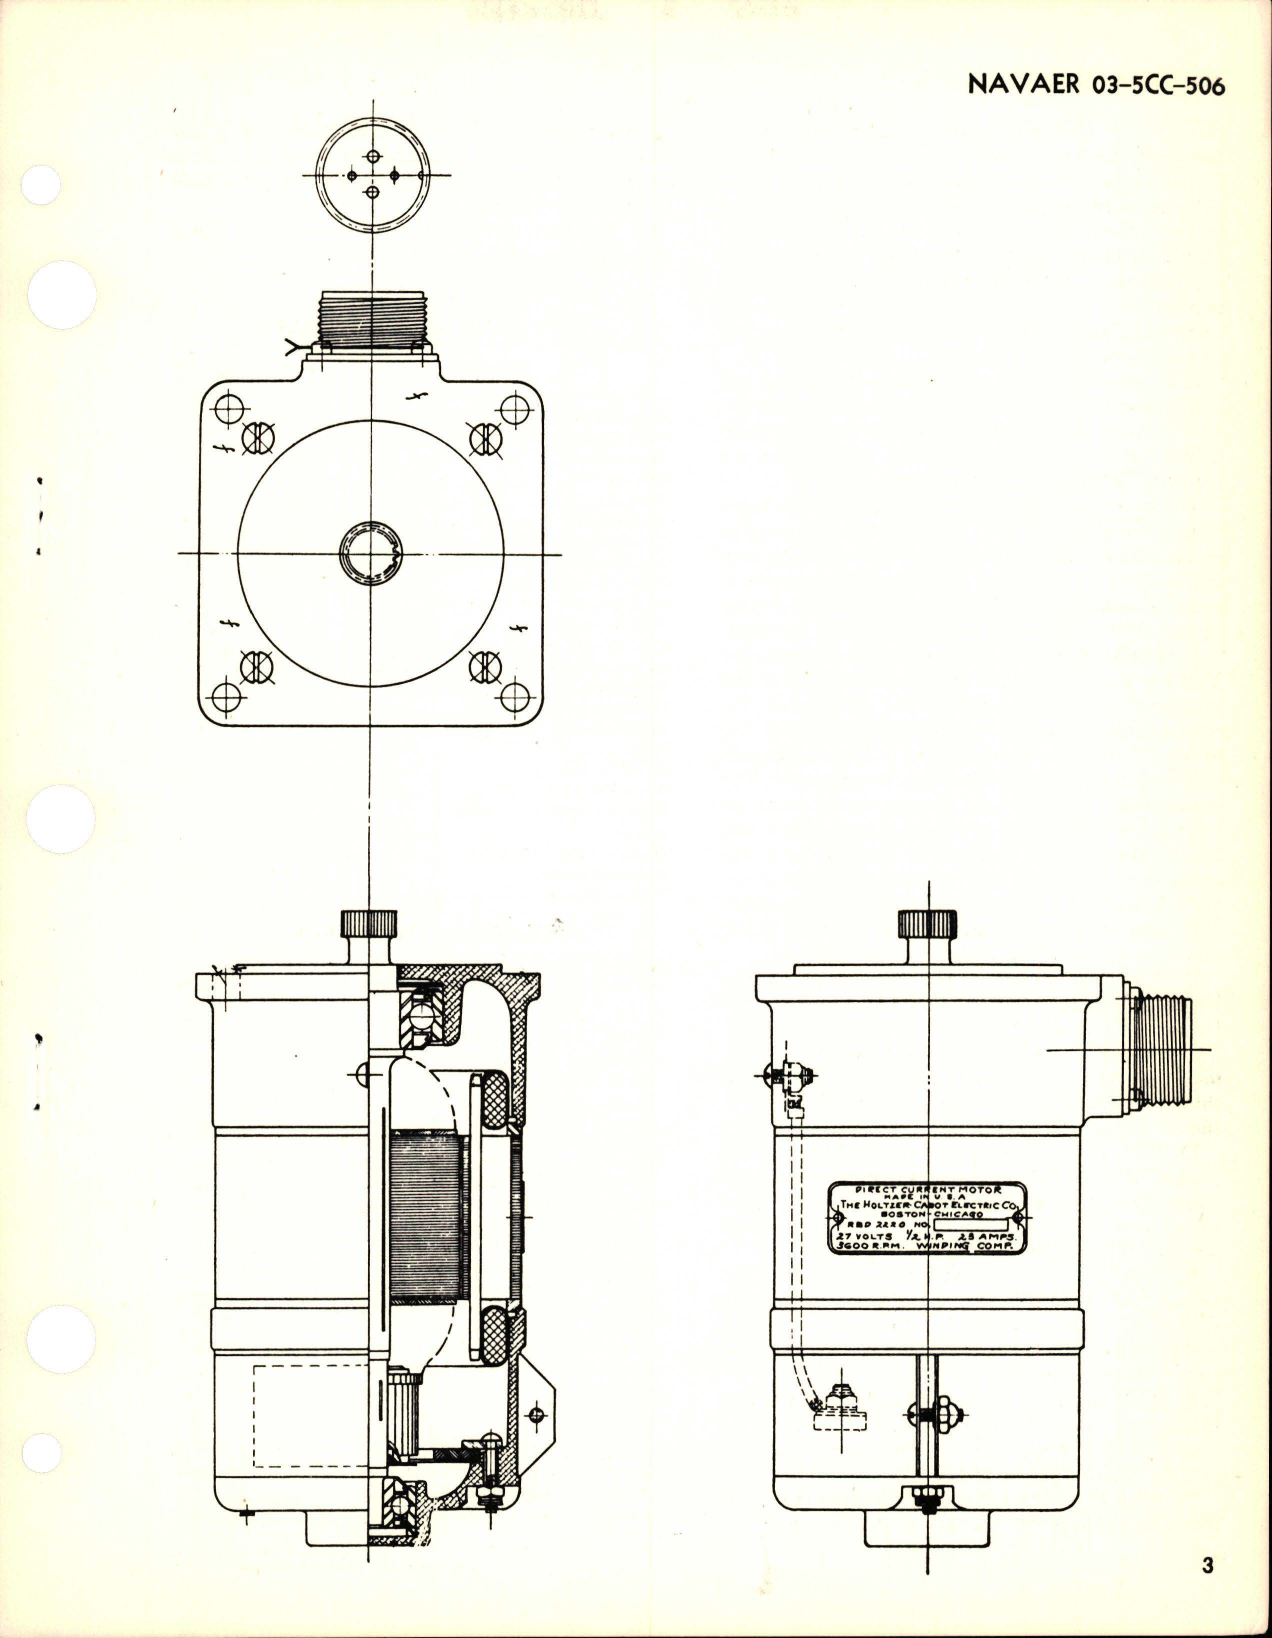 Sample page 5 from AirCorps Library document: Maintenance Instructions for Bomb Bay Actuating Motor - .5 HP - 3600 RPM- 27 Volts DC - Type RBD 2220